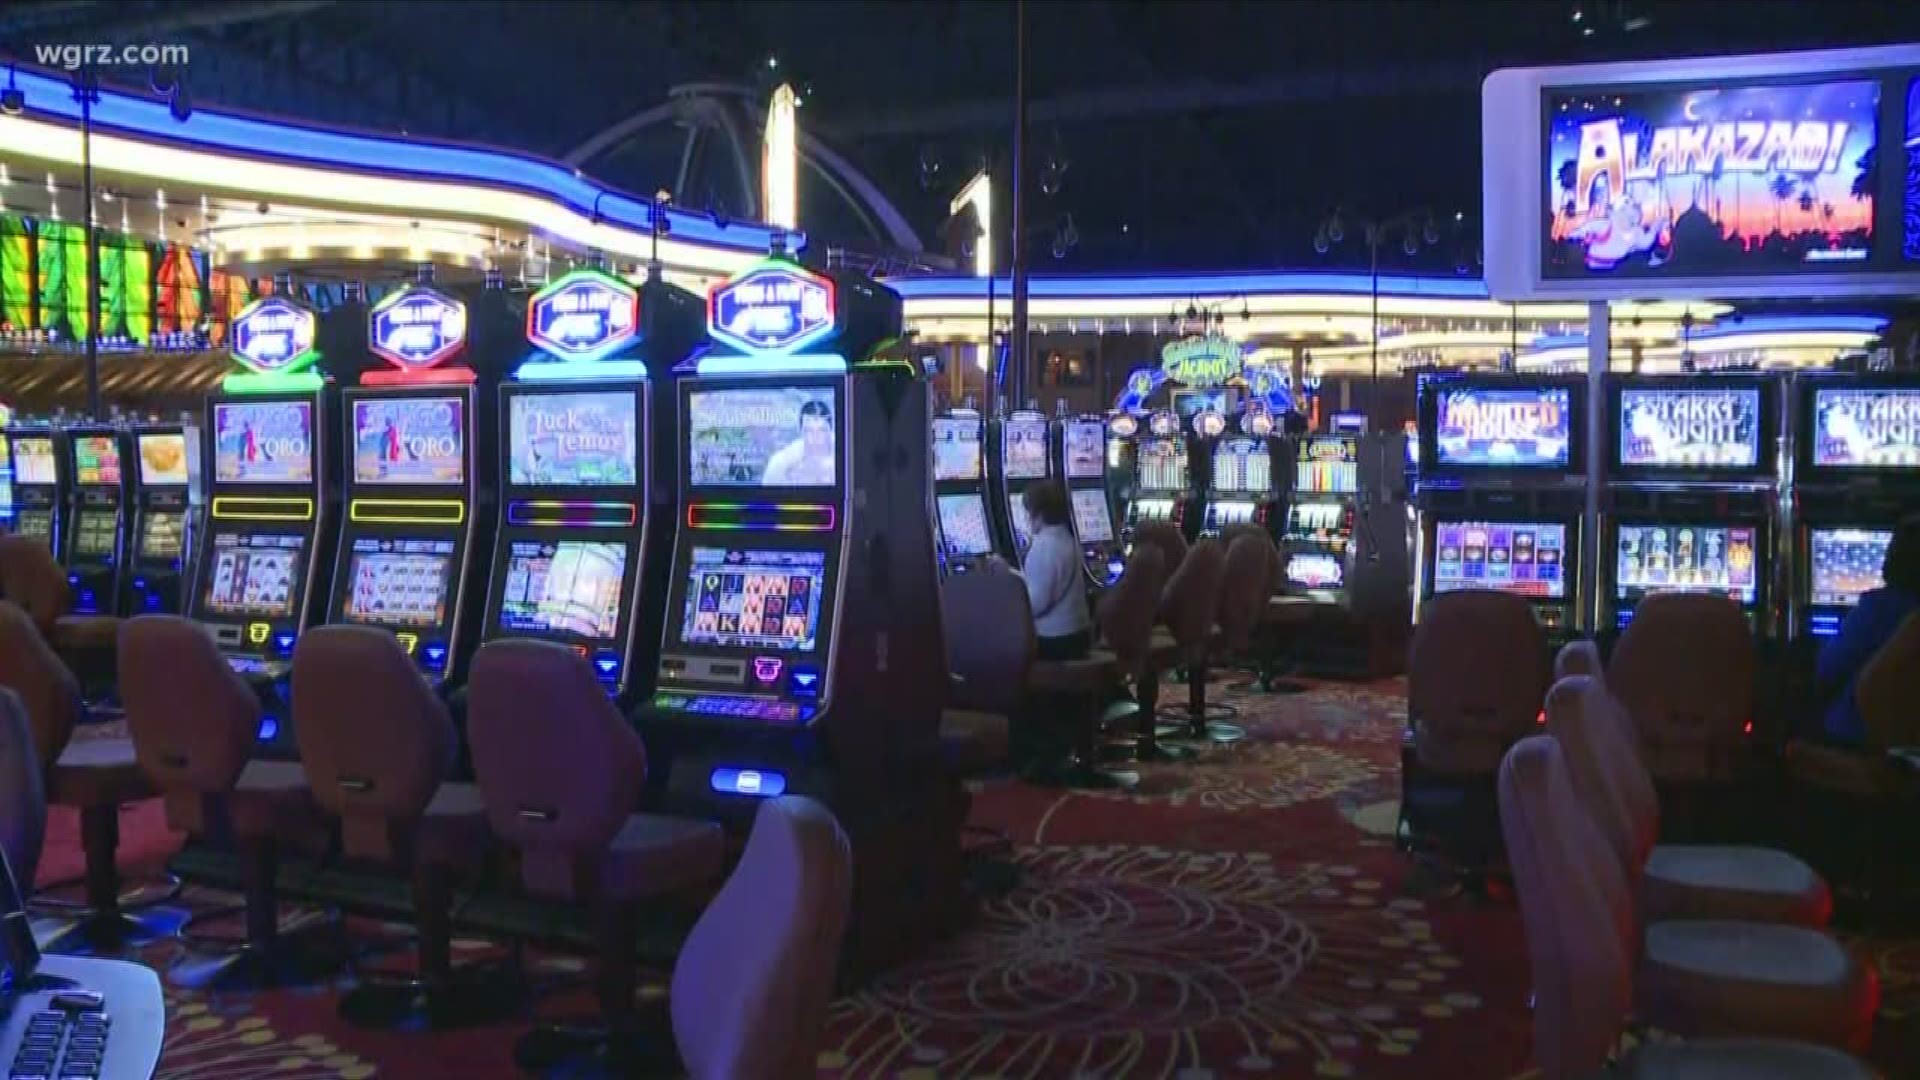 Employees will be paid for at least the next two weeks as the casinos are shut down.